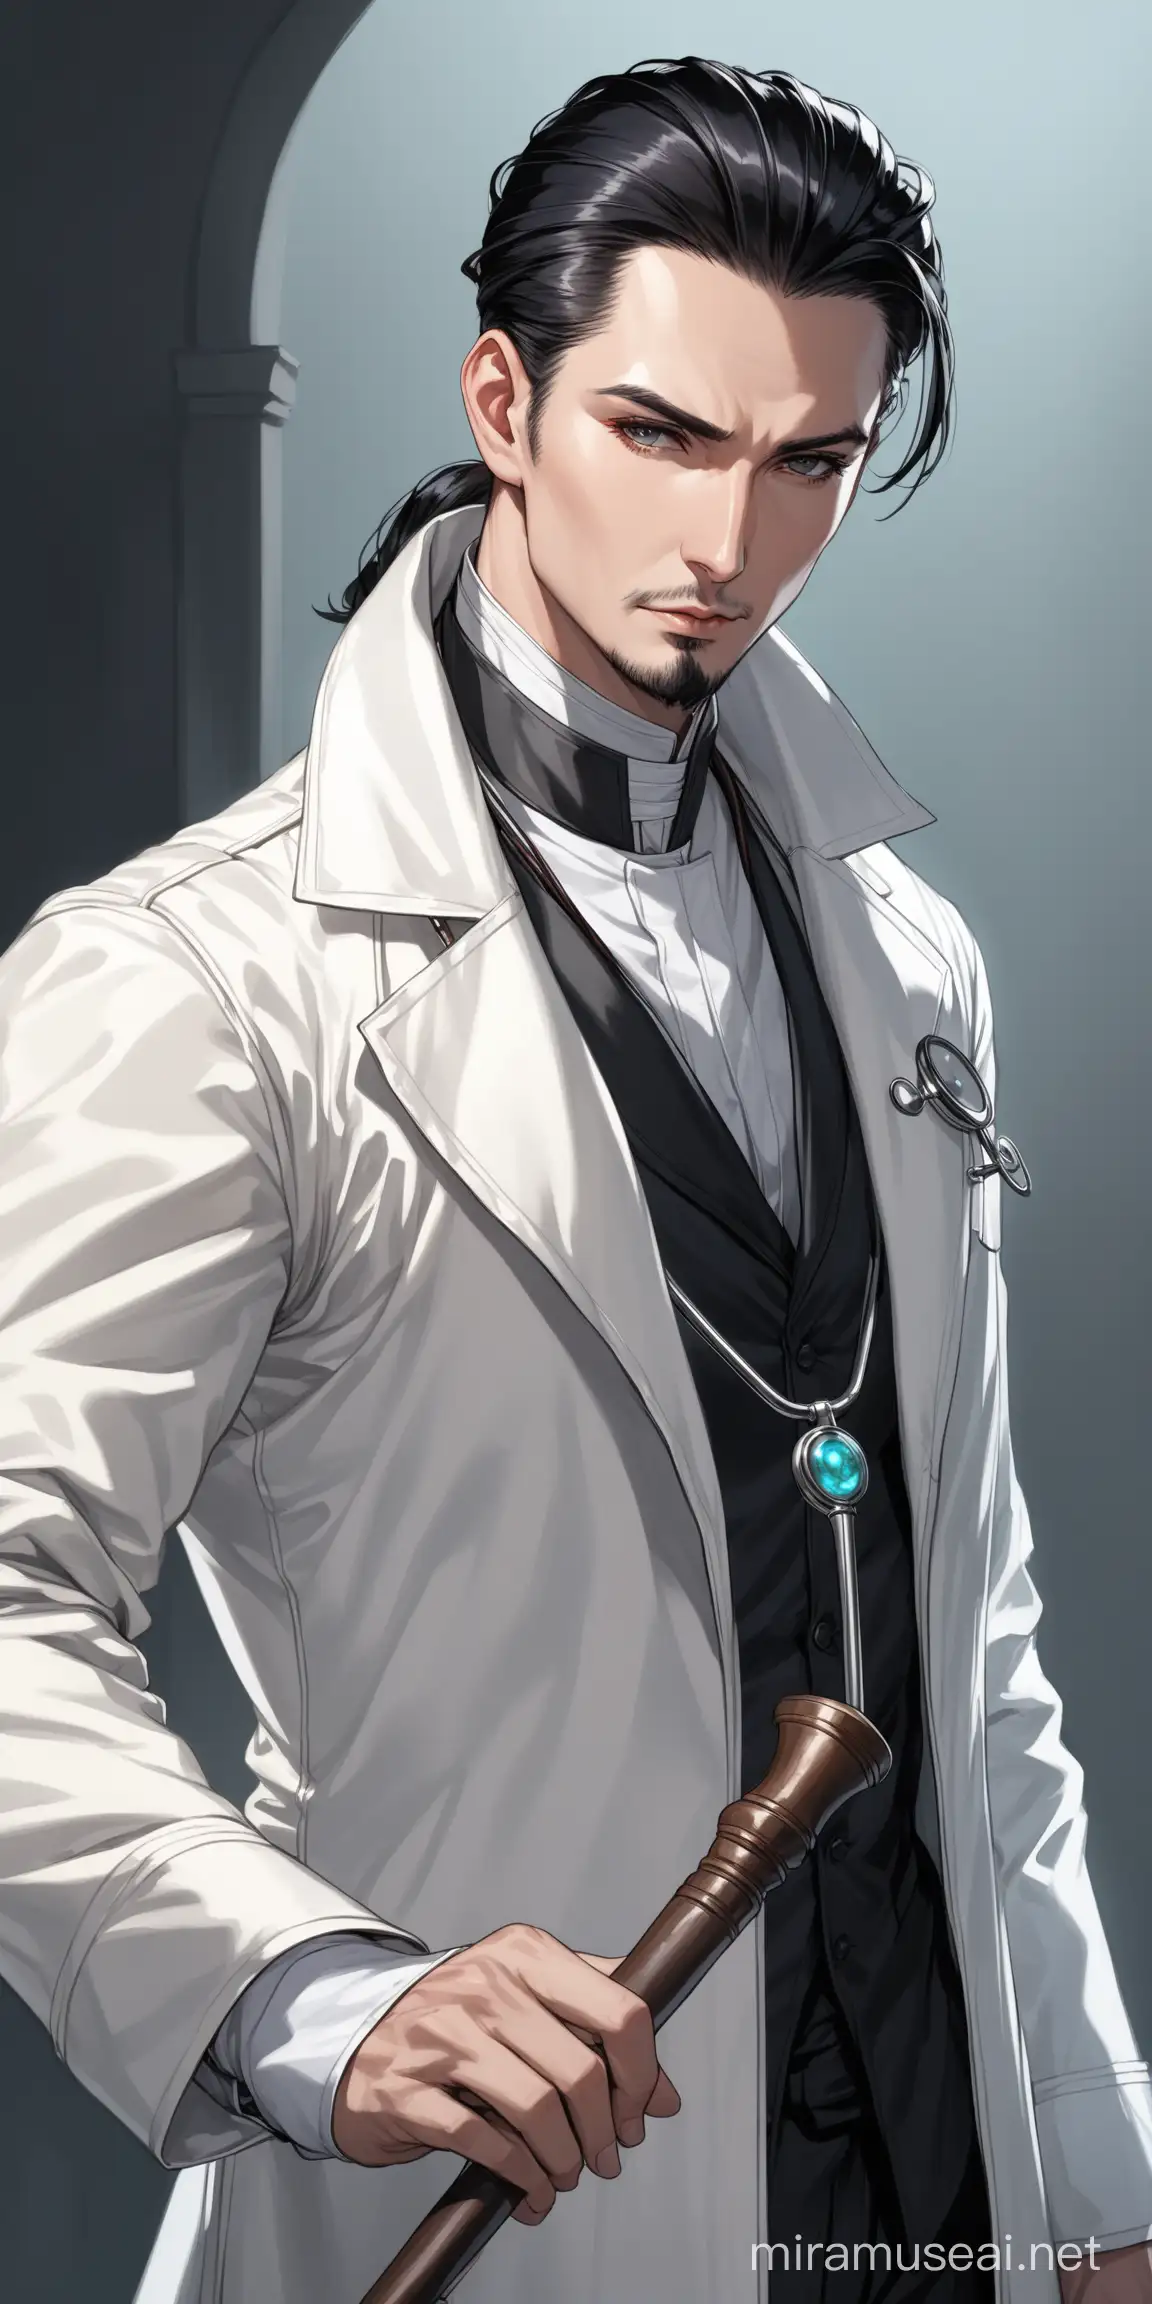 white male doctor with slick pulled back black hair in a long white leather jacket, weilding a cane, fantacy theme. rogue cleric doctor